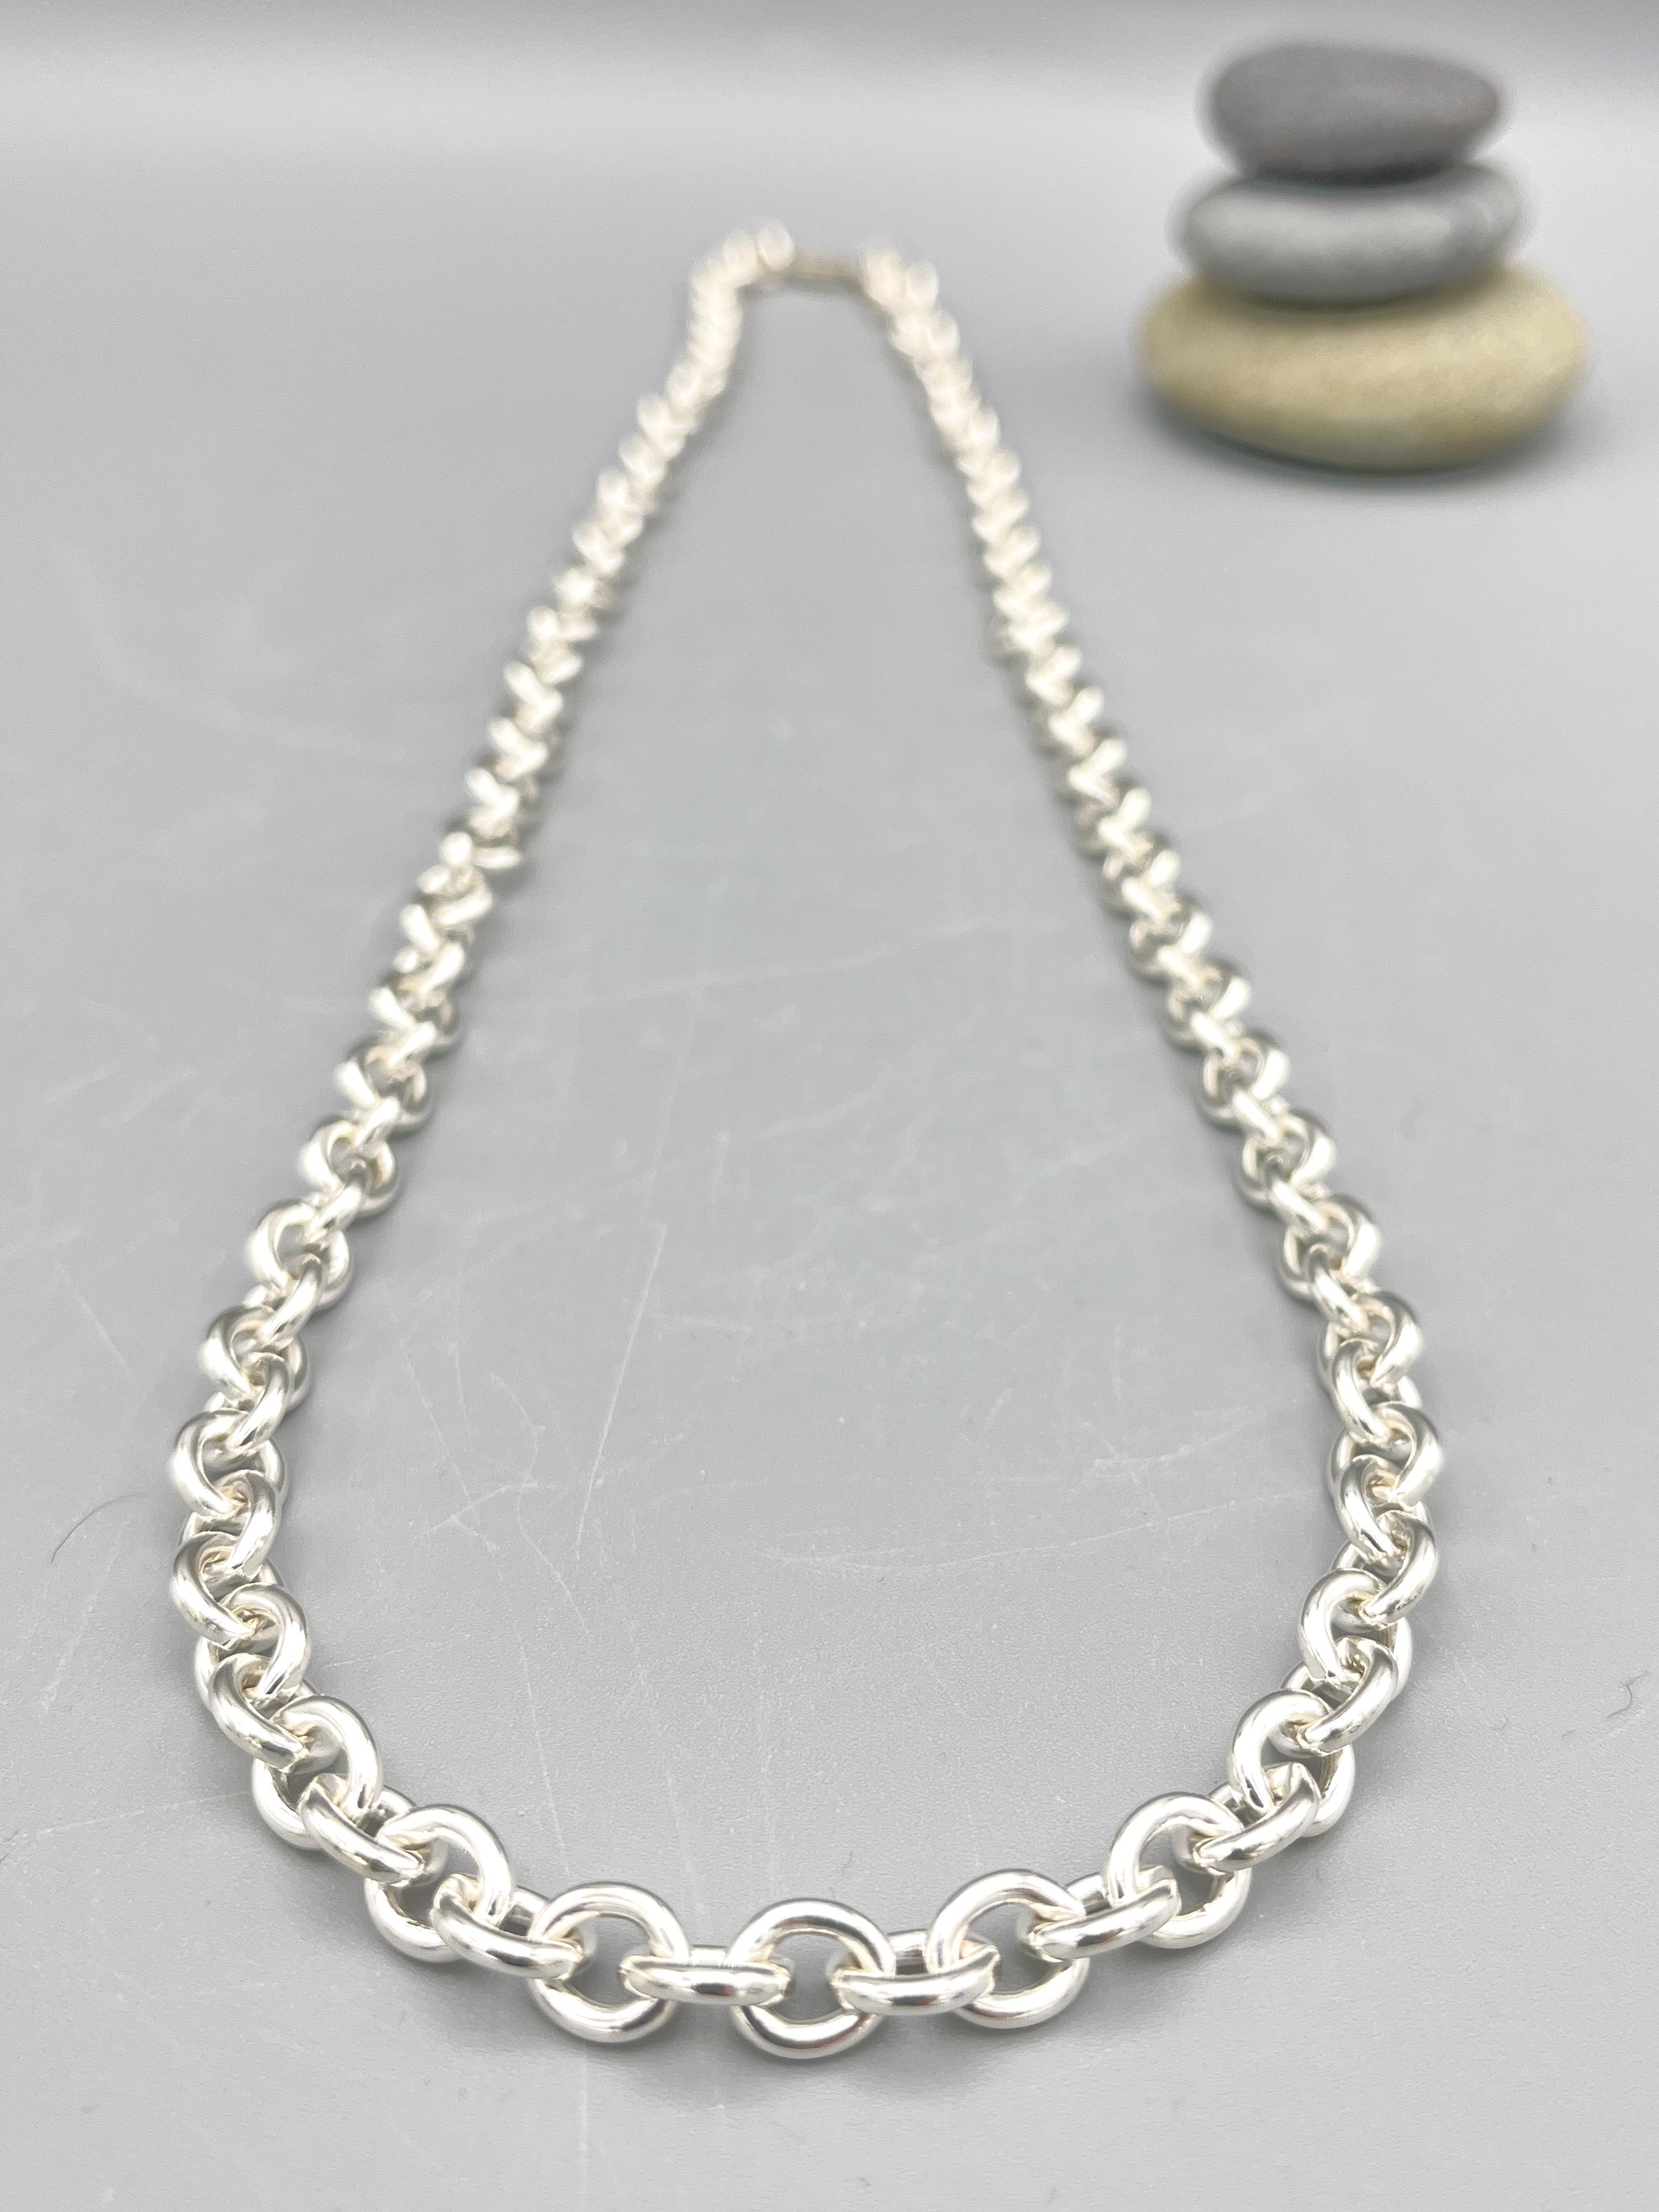 Sterling Silver Necklace. 36½” Italian heavy cable link with lobster claw clasp